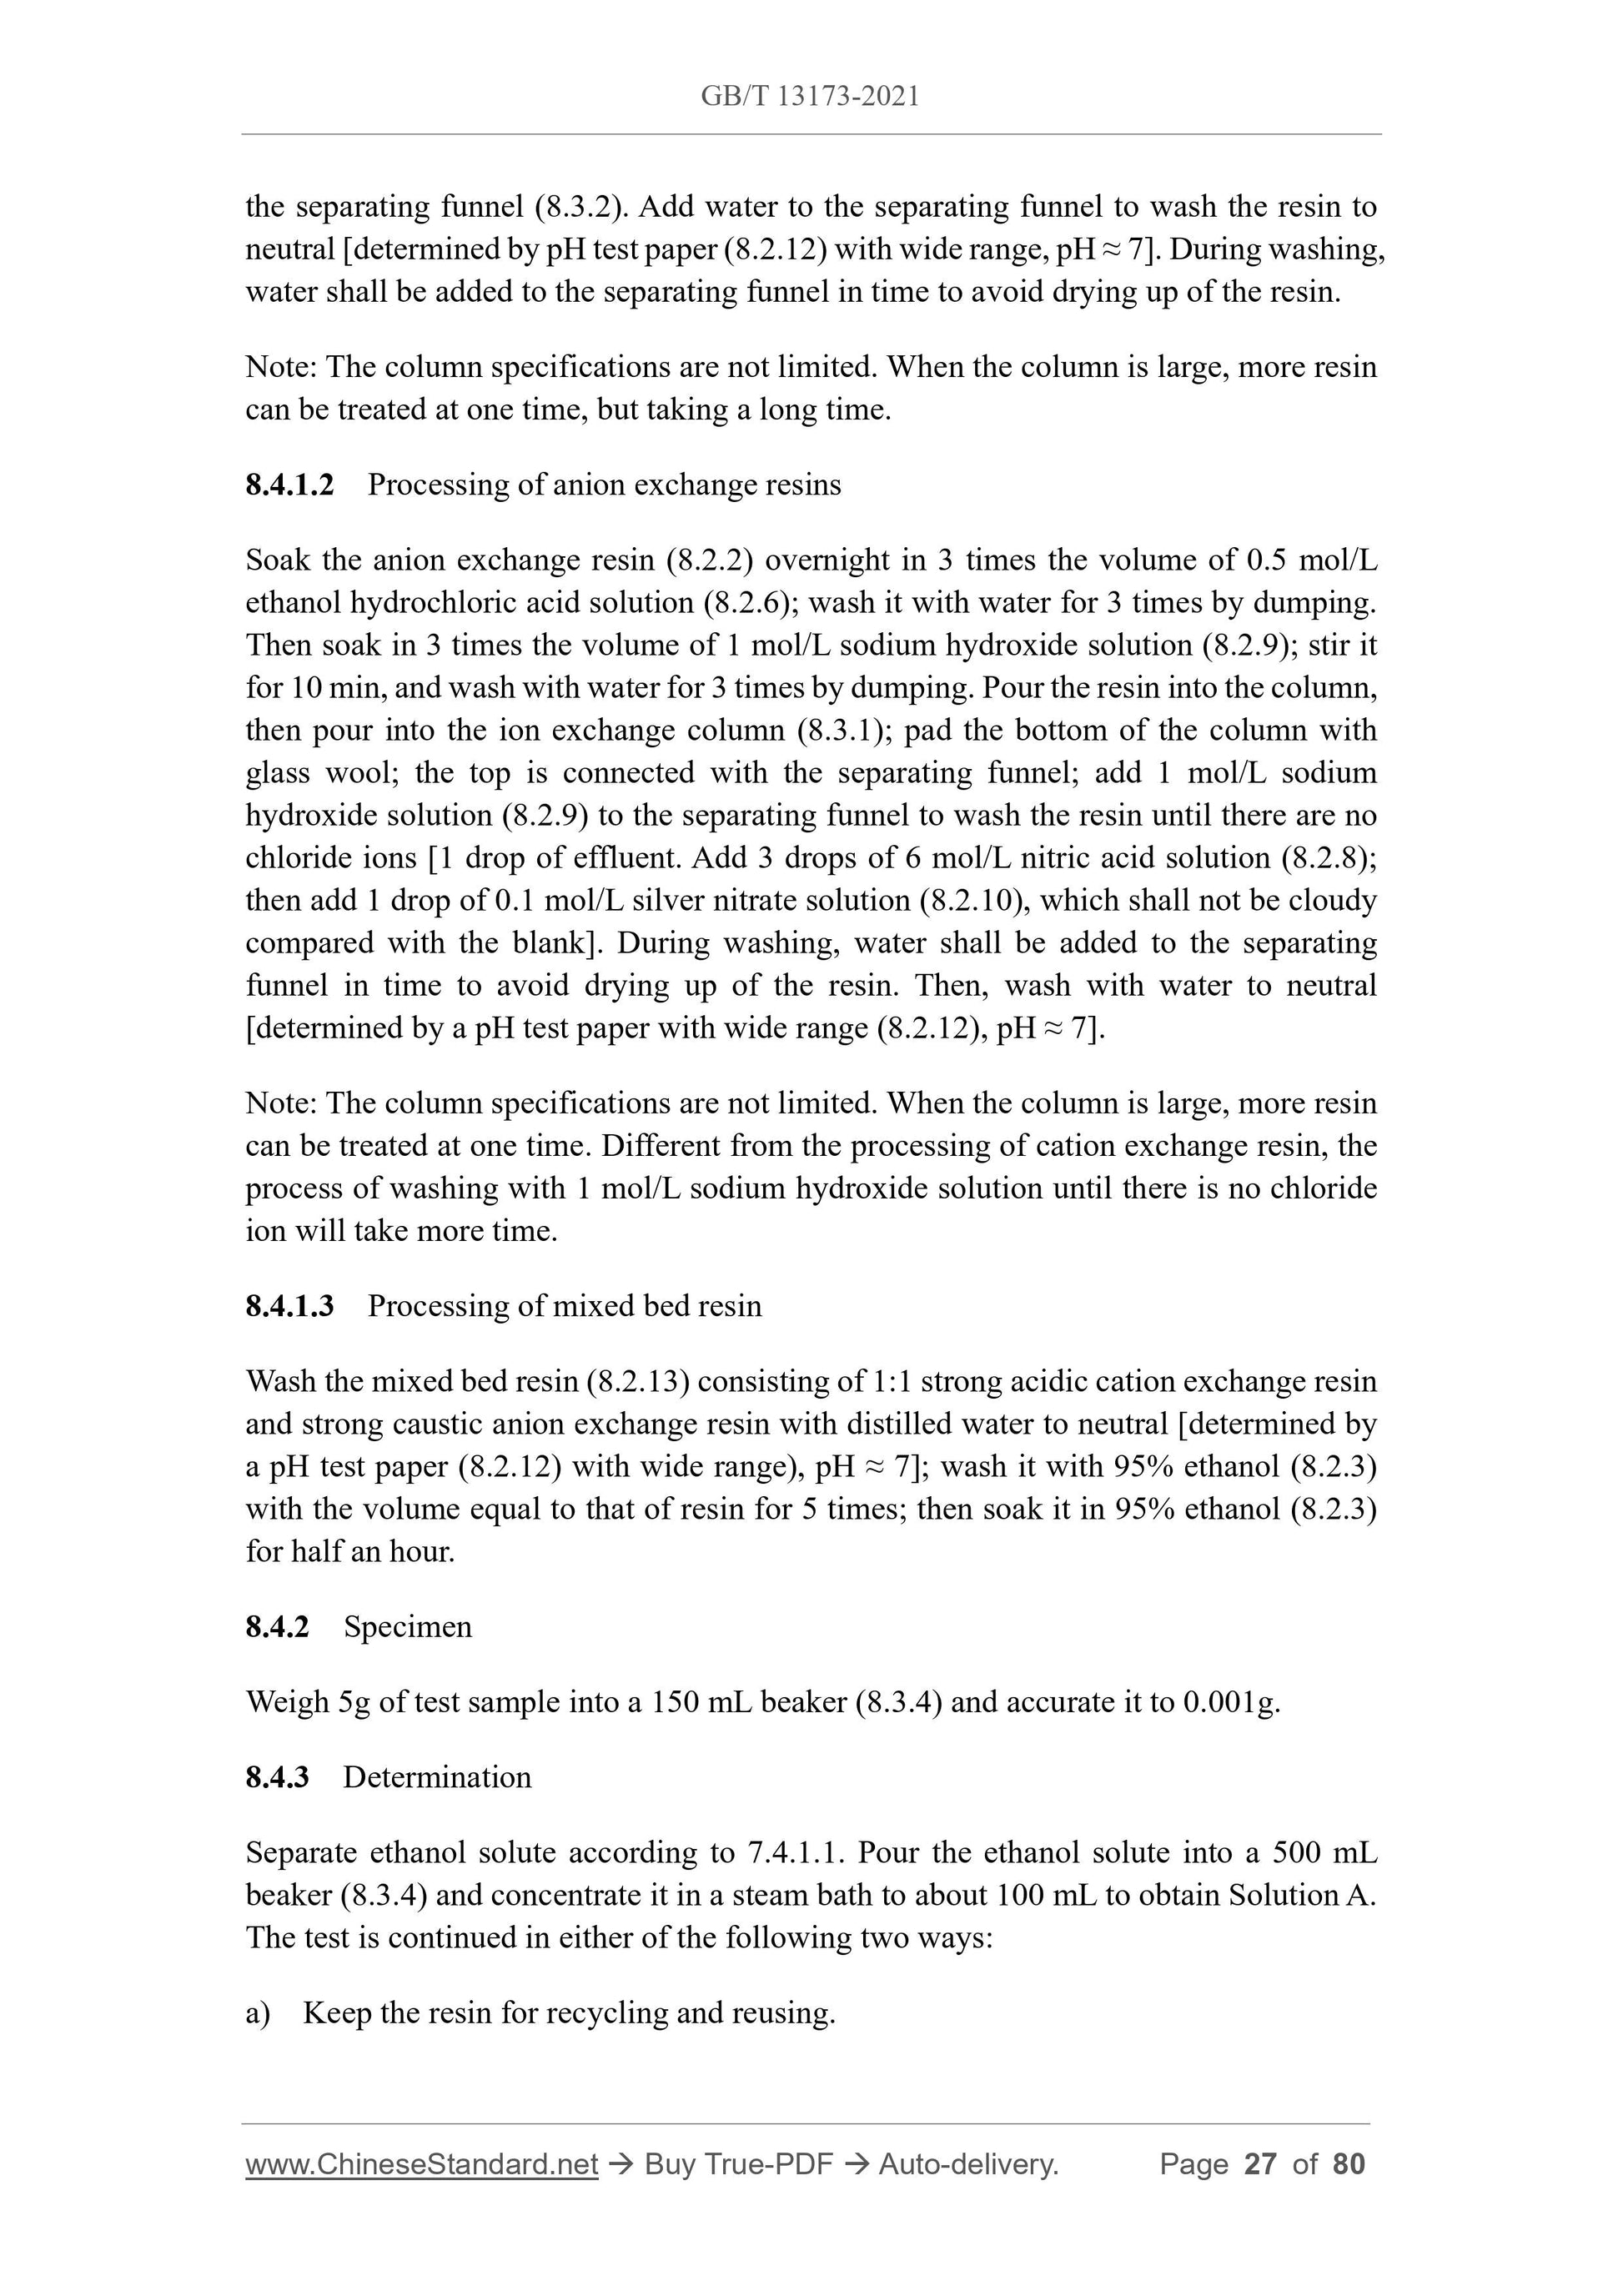 GB/T 13173-2021 Page 12